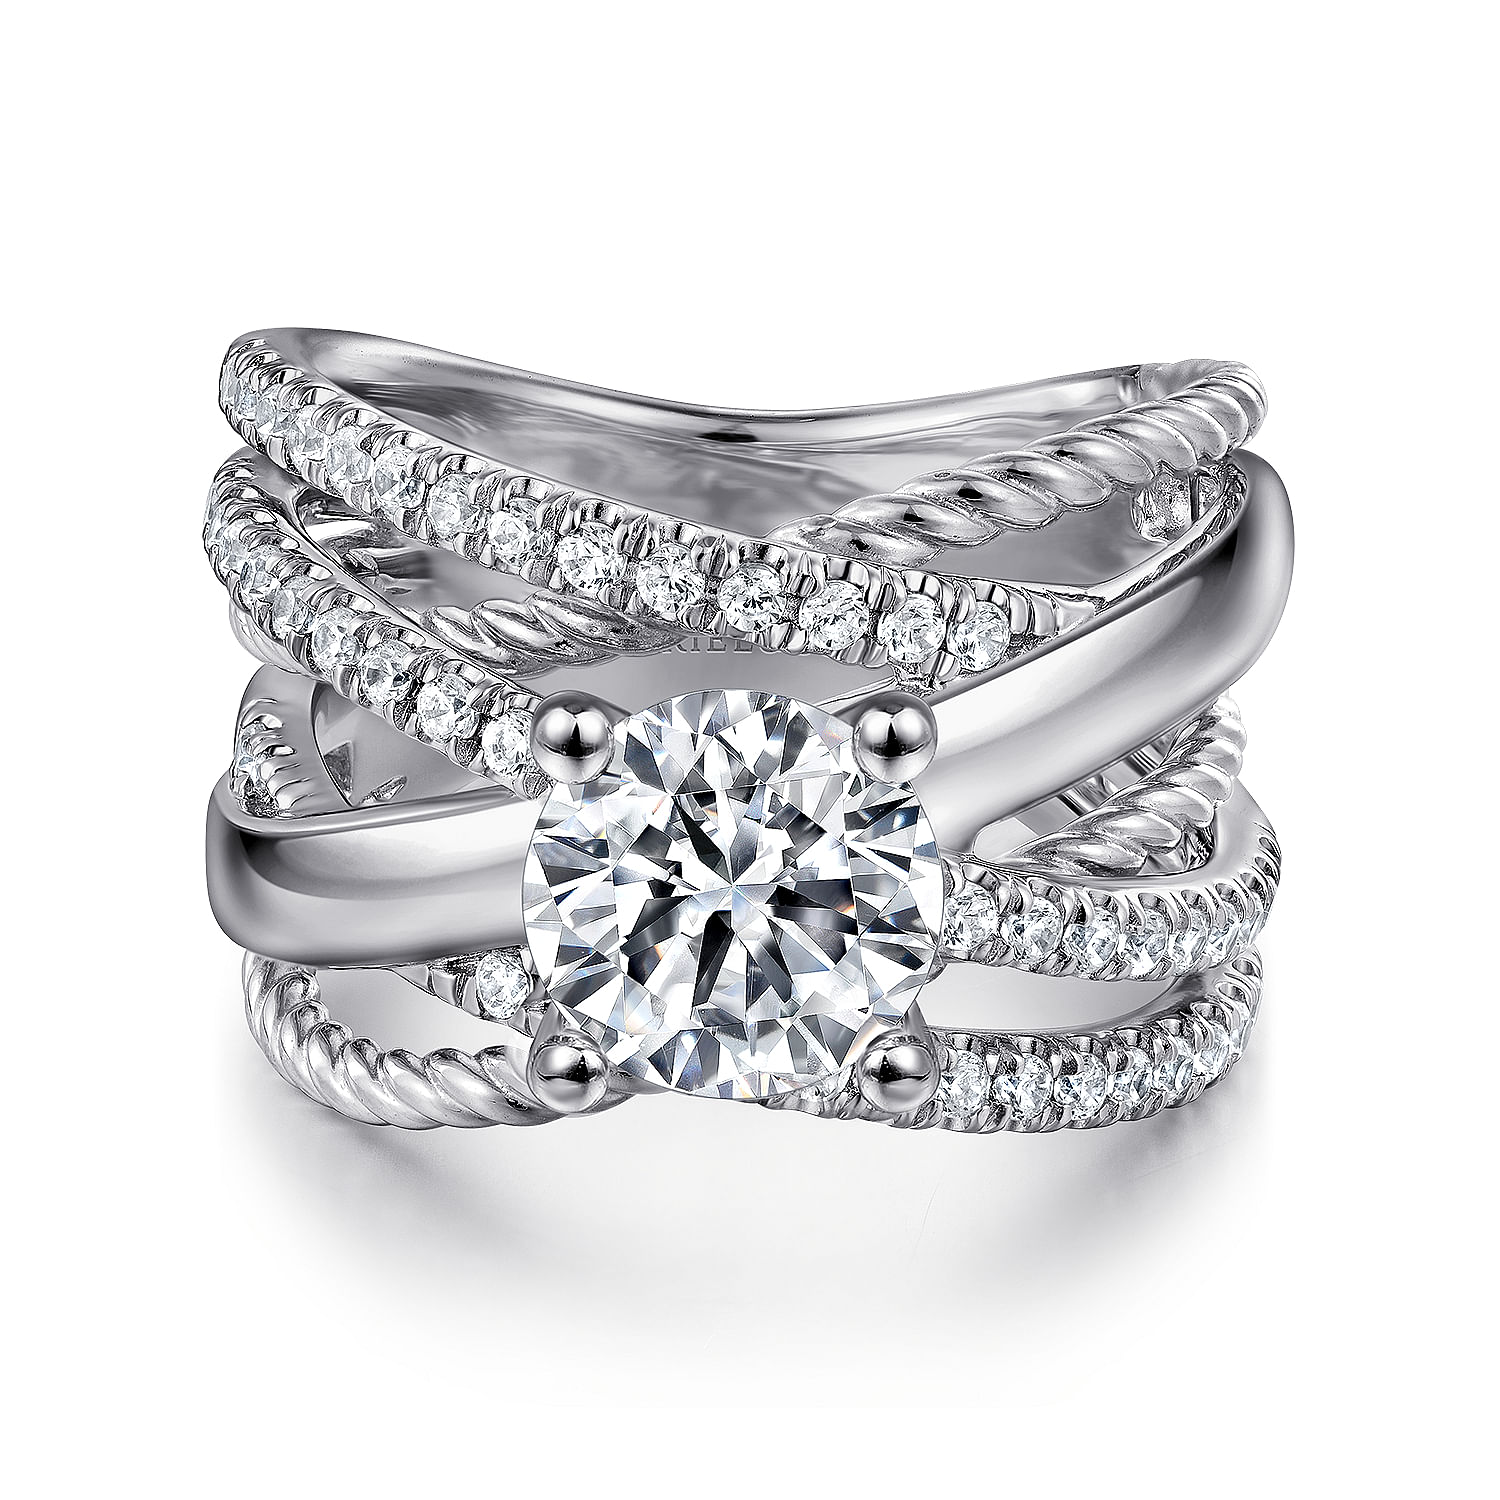 Affection - 14K White Gold Free Form Round Diamond Engagement Ring